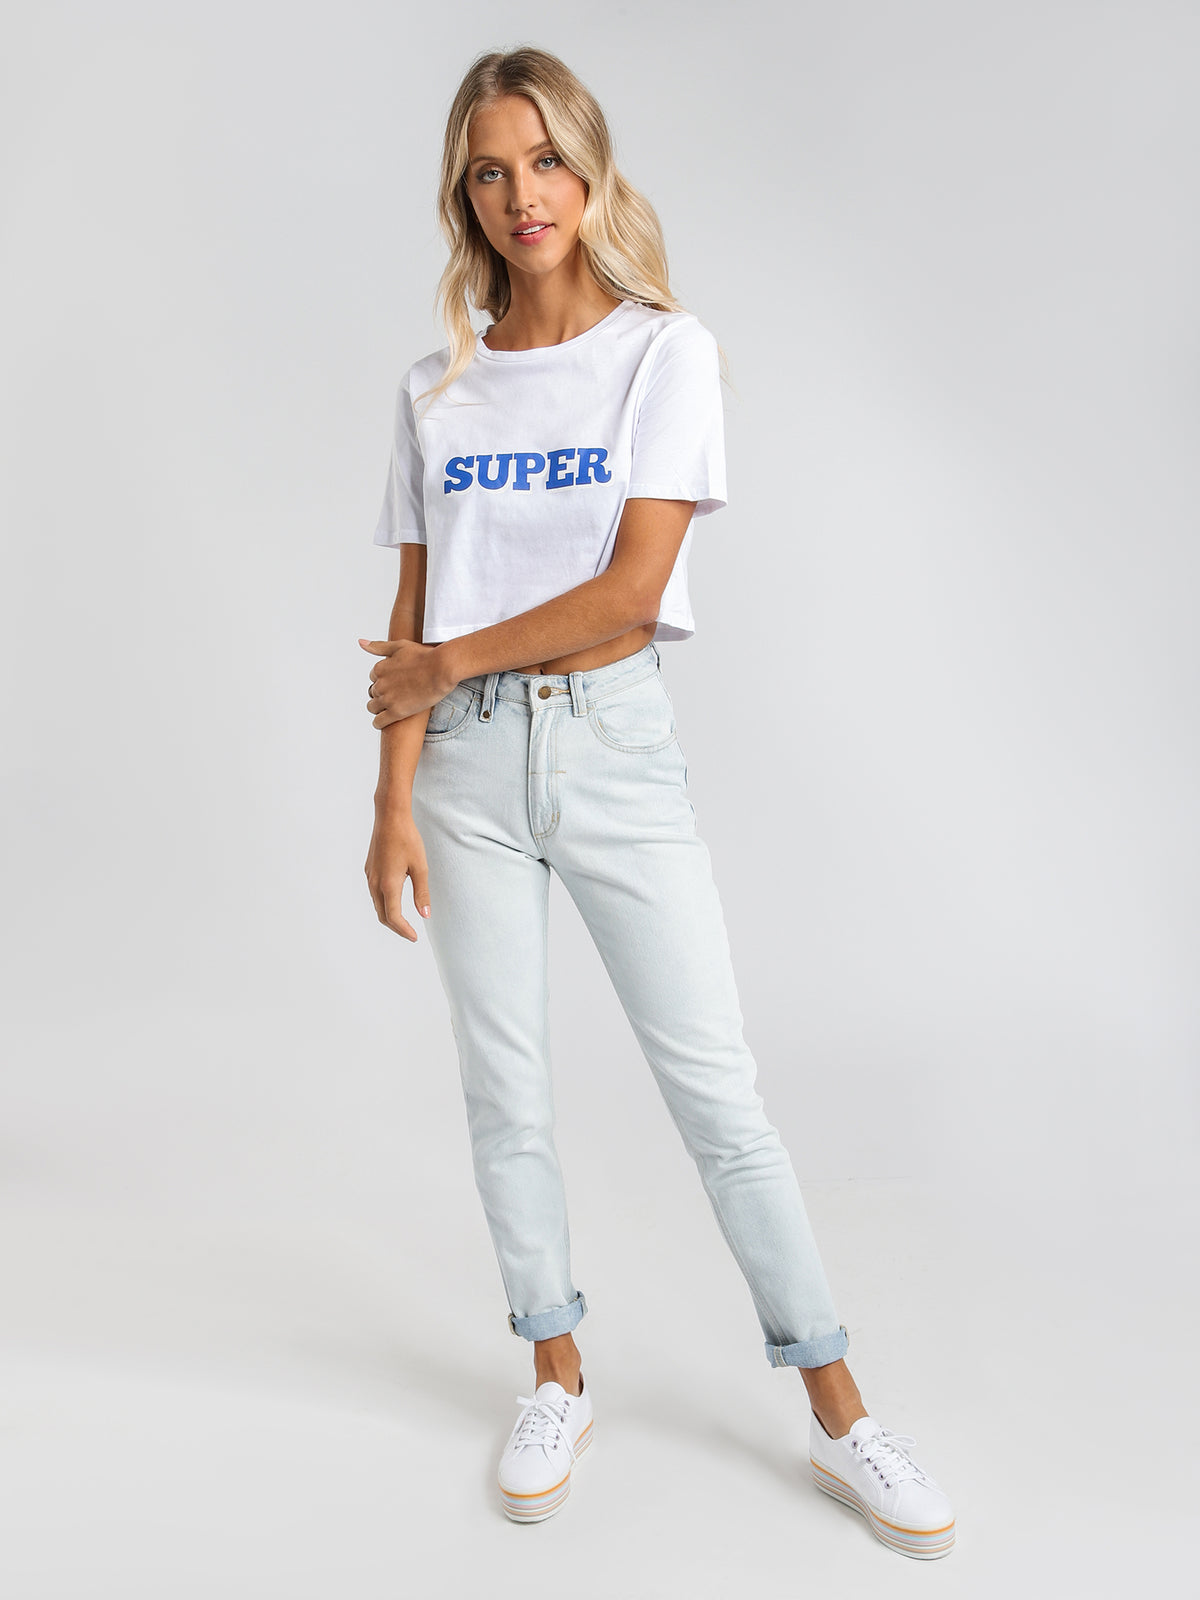 Super Cropped T-Shirt in White